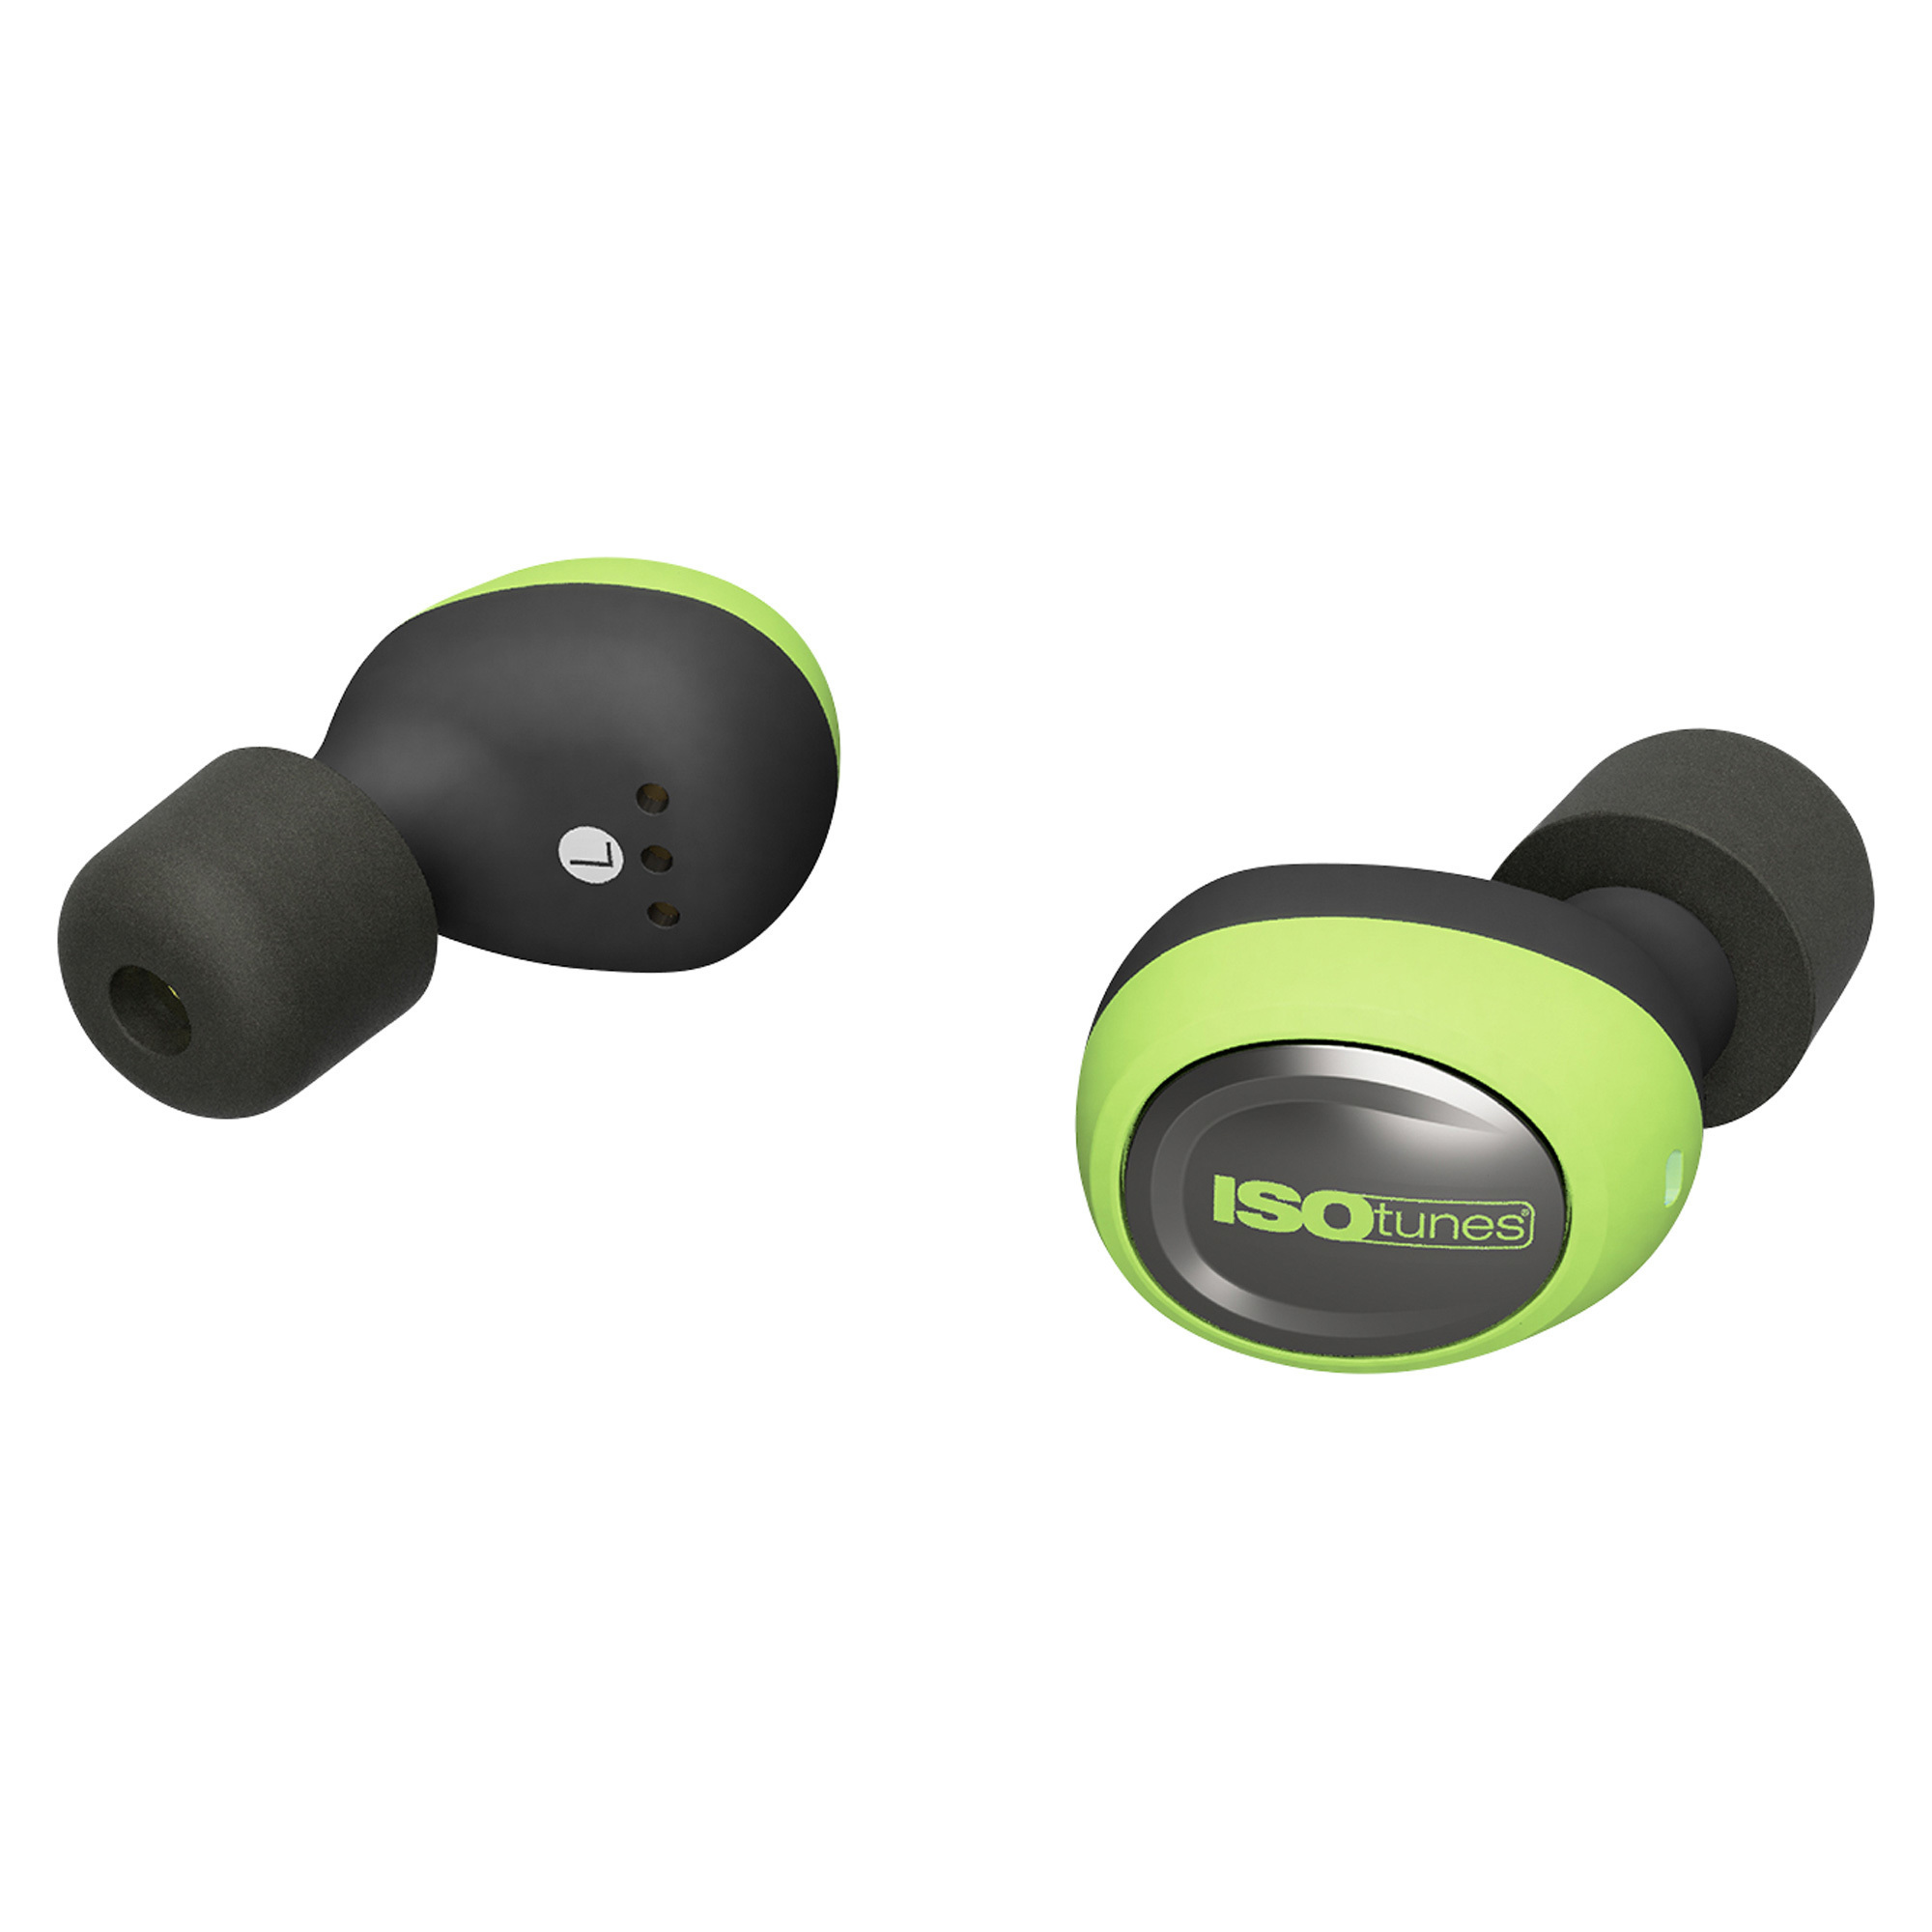 ISOtunes FREE 2.0 Wireless Headphones, Green/Black, Includes 6 Pairs of Eartips: 3 Pairs Foam Eartips, 3 Pairs Silicone Double Flange Eartips, Model